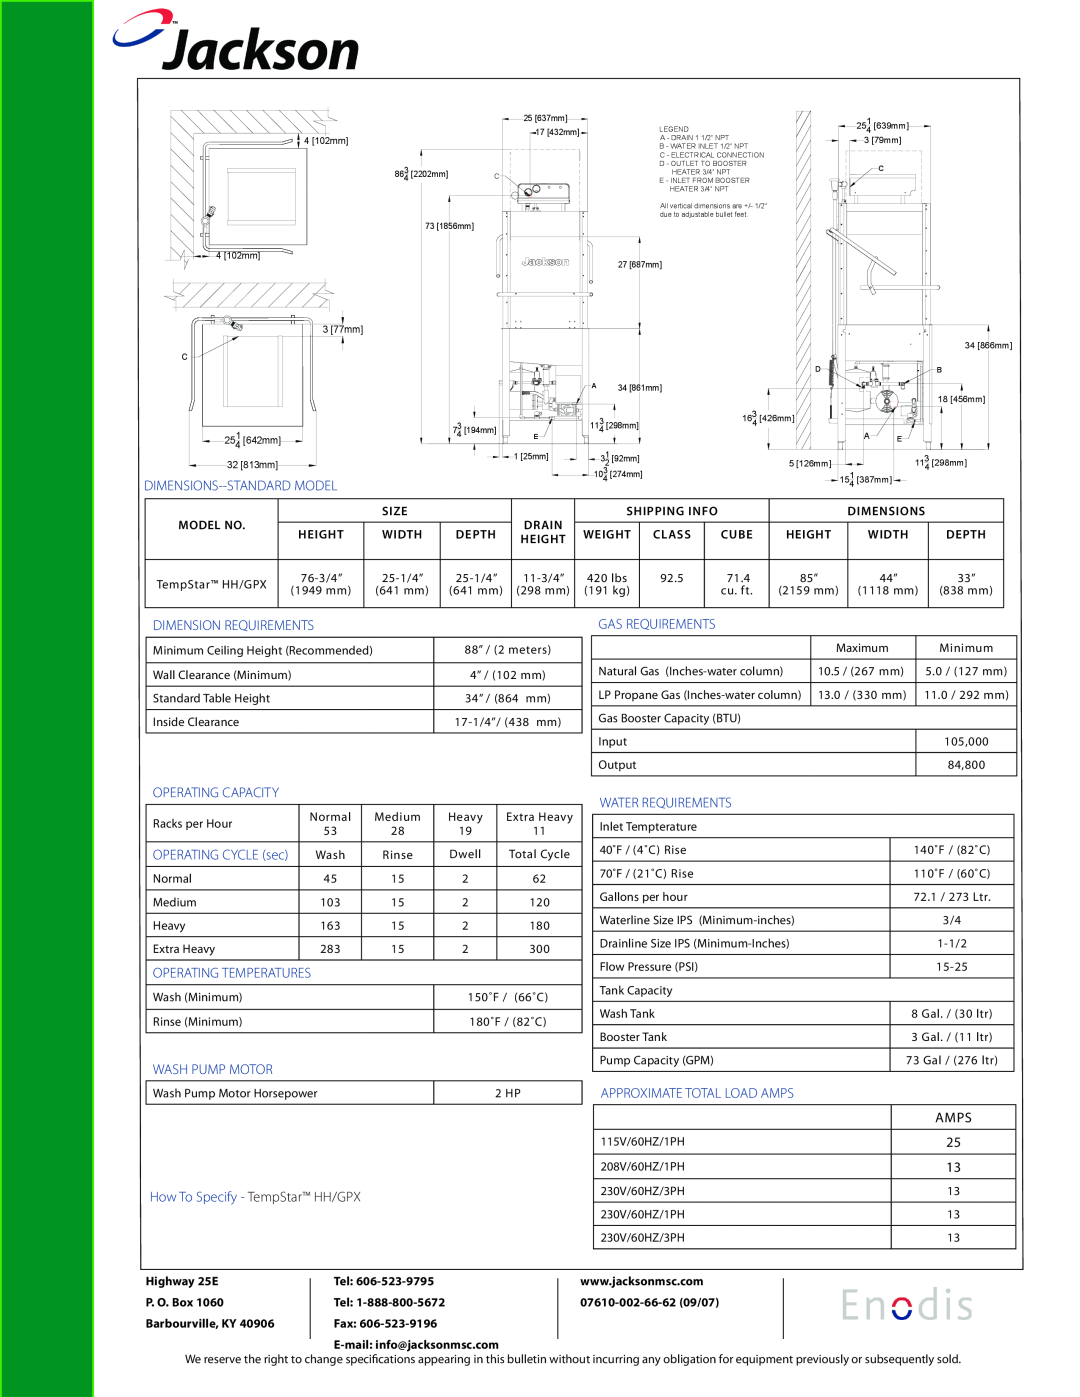 Jackson HH/GPX Amps, Dimensions--Standard Model, Dimension Requirements, Gas Requirements, Operating Capacity 